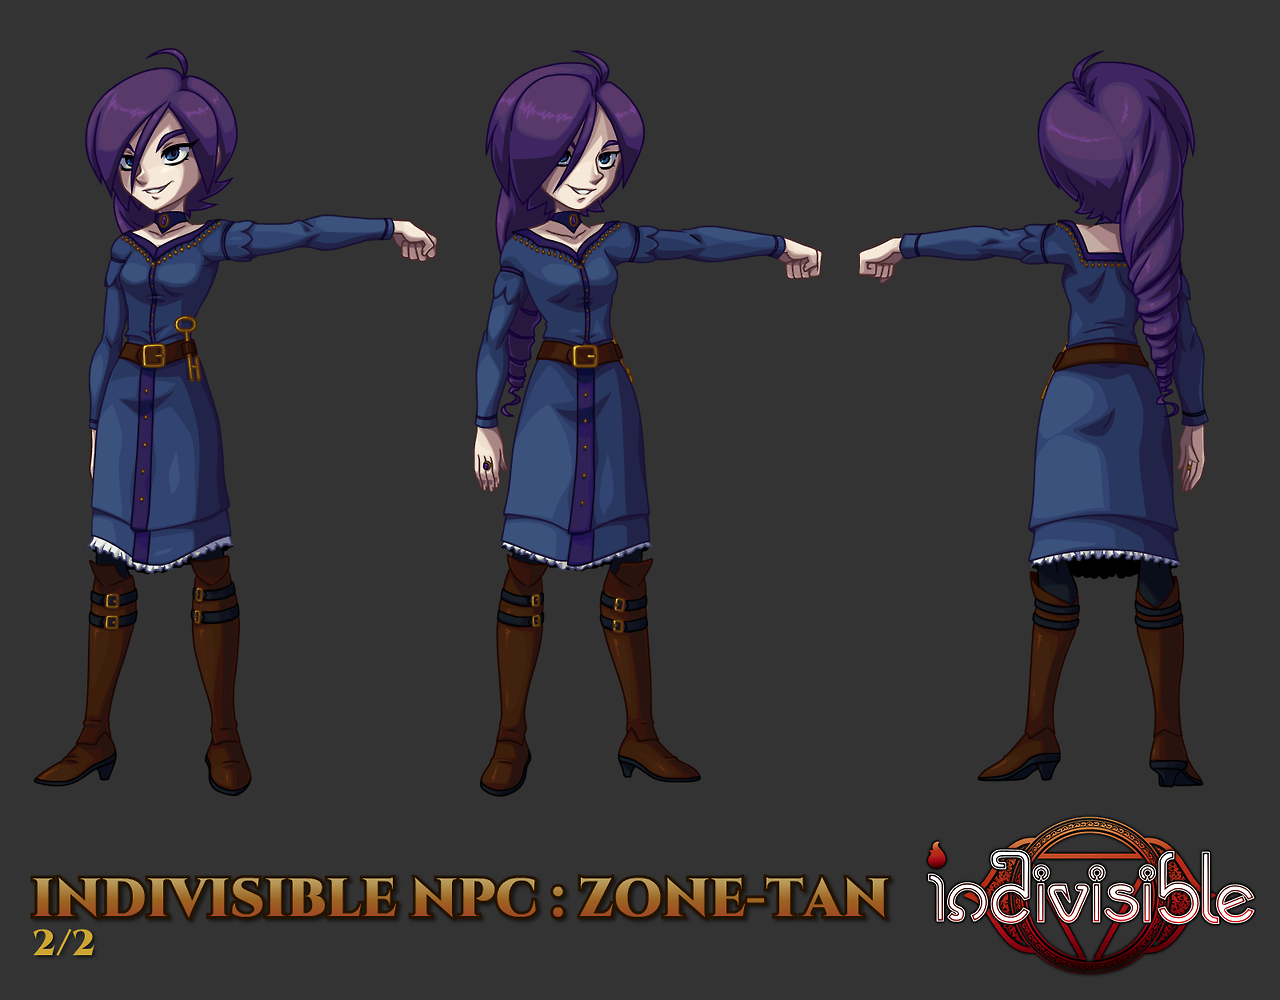 zonesfw:Here is my design for the ZONE-tan NPC that will make an appearance in Indivisible.http://www.indivisiblegame.com/It